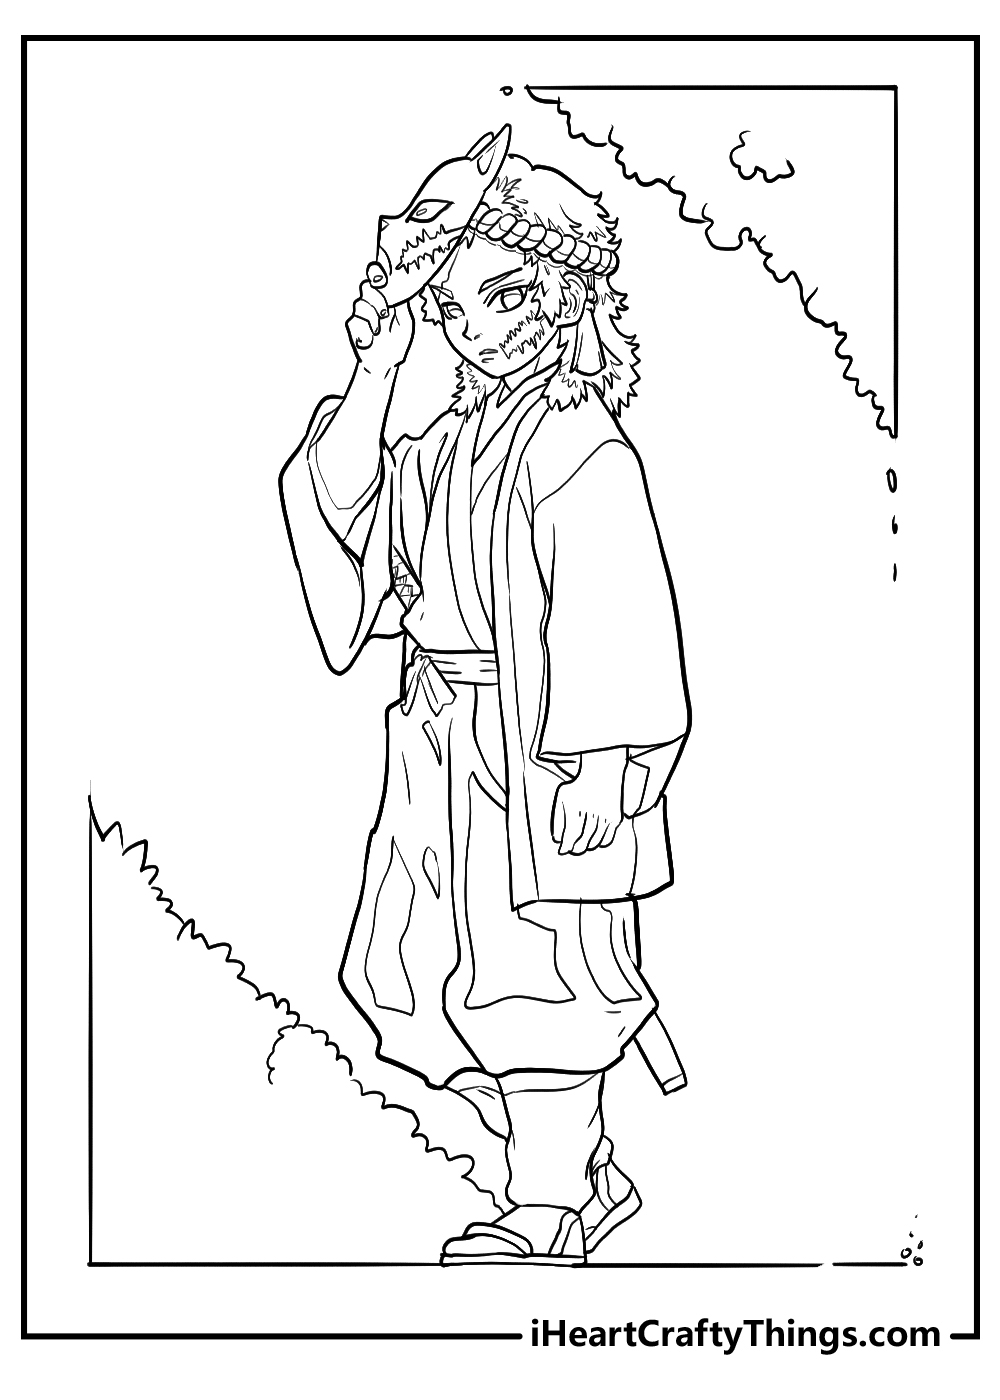 Demon Slayer Coloring Pages Printable, Free, and Easy